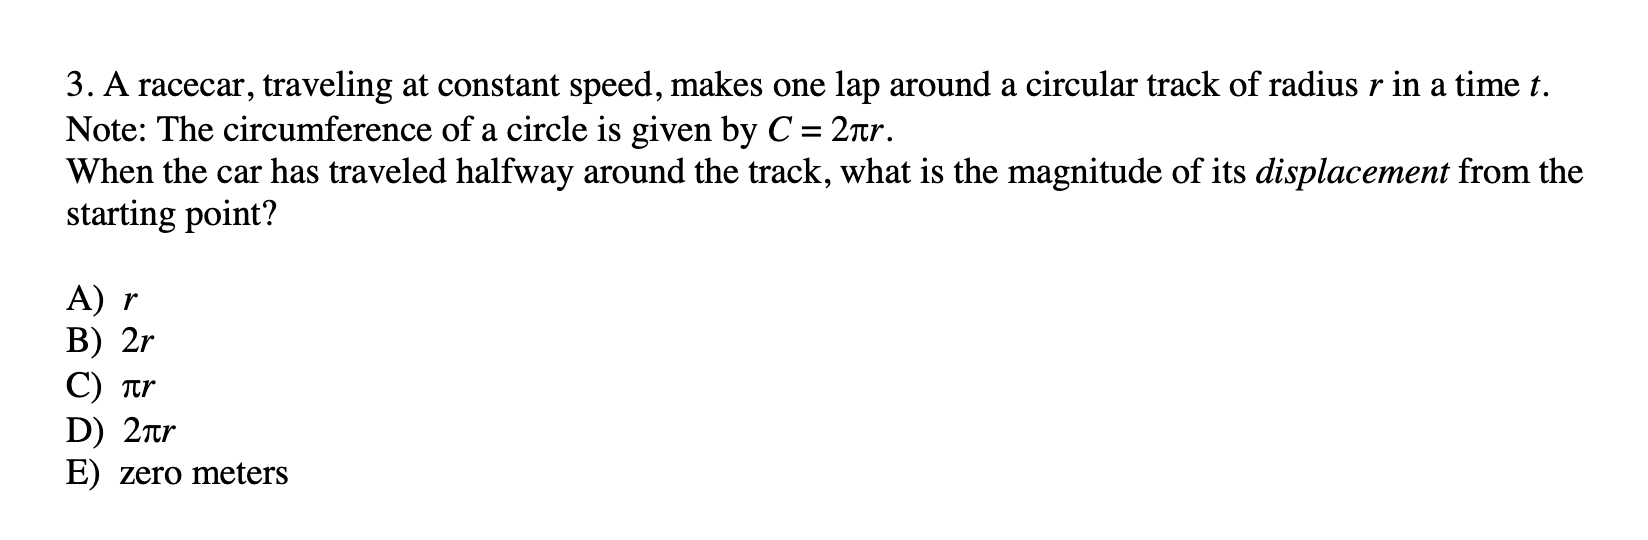 3. A racecar, traveling at constant speed, makes one lap around a circular track of radius r in a time t.
Note: The circumference of a circle is given by C = 2r.
When the car has traveled halfway around the track, what is the magnitude of its displacement from the
starting point?
%3D
A) r
В) 2r
C) tr
D) 2ar
E) zero meters
